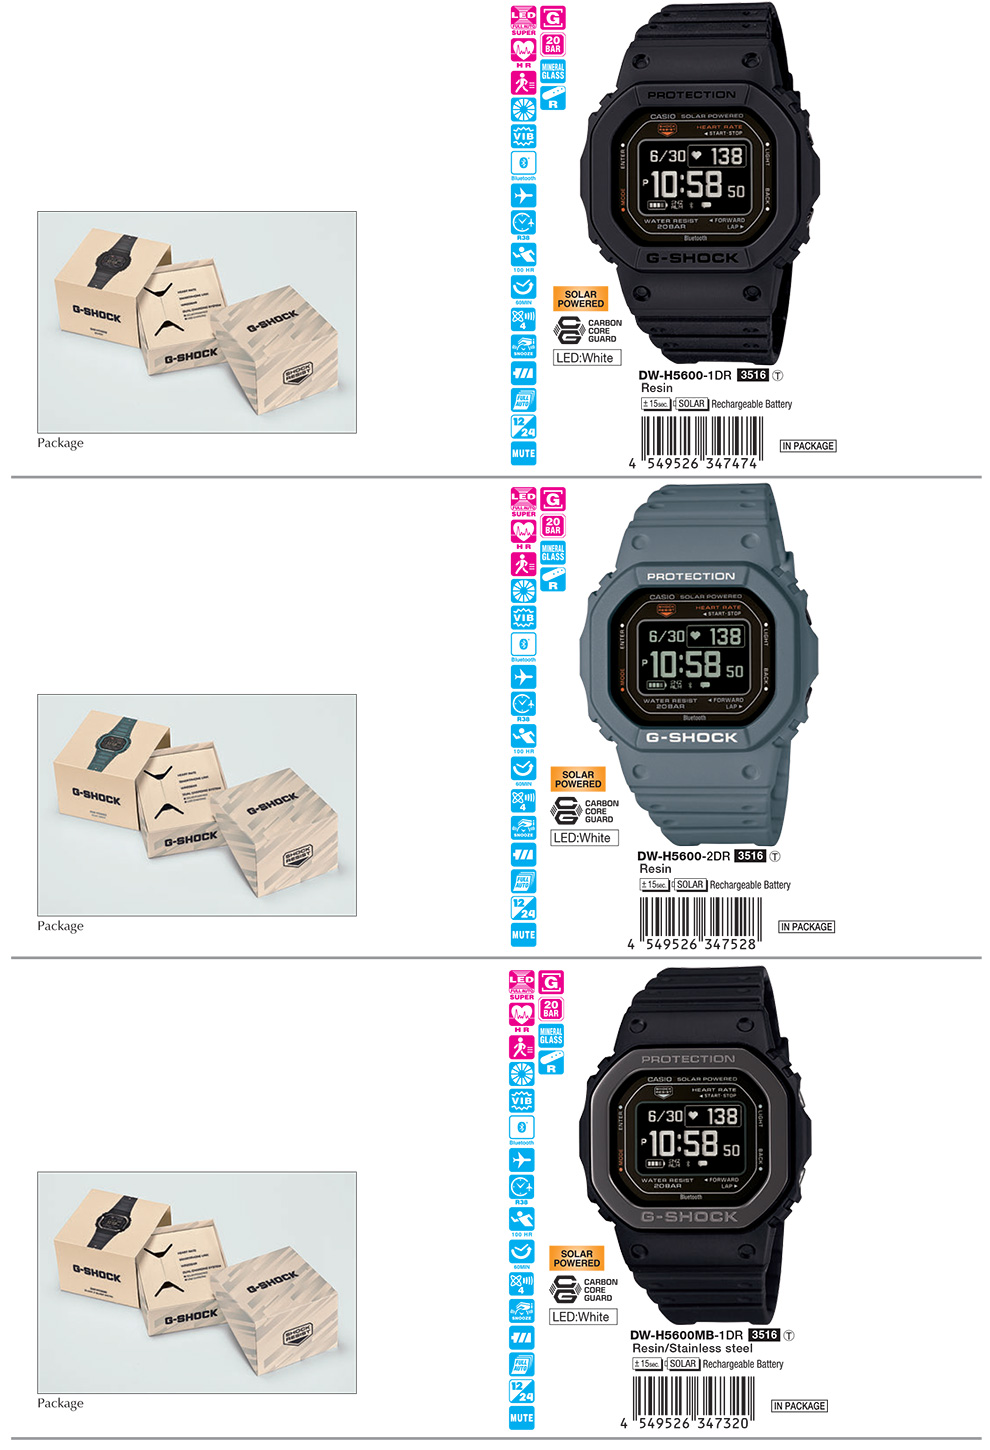 G-SHOCK, G-SQUAD, octagonal, heart rate monitor, Smartphone, multi-sport, Apps, USB charger, solar, DW-H5600EX-1, DW-H5600MB-1, DW-H5600MB-2, DW-H5600-1, DW-H5600-2